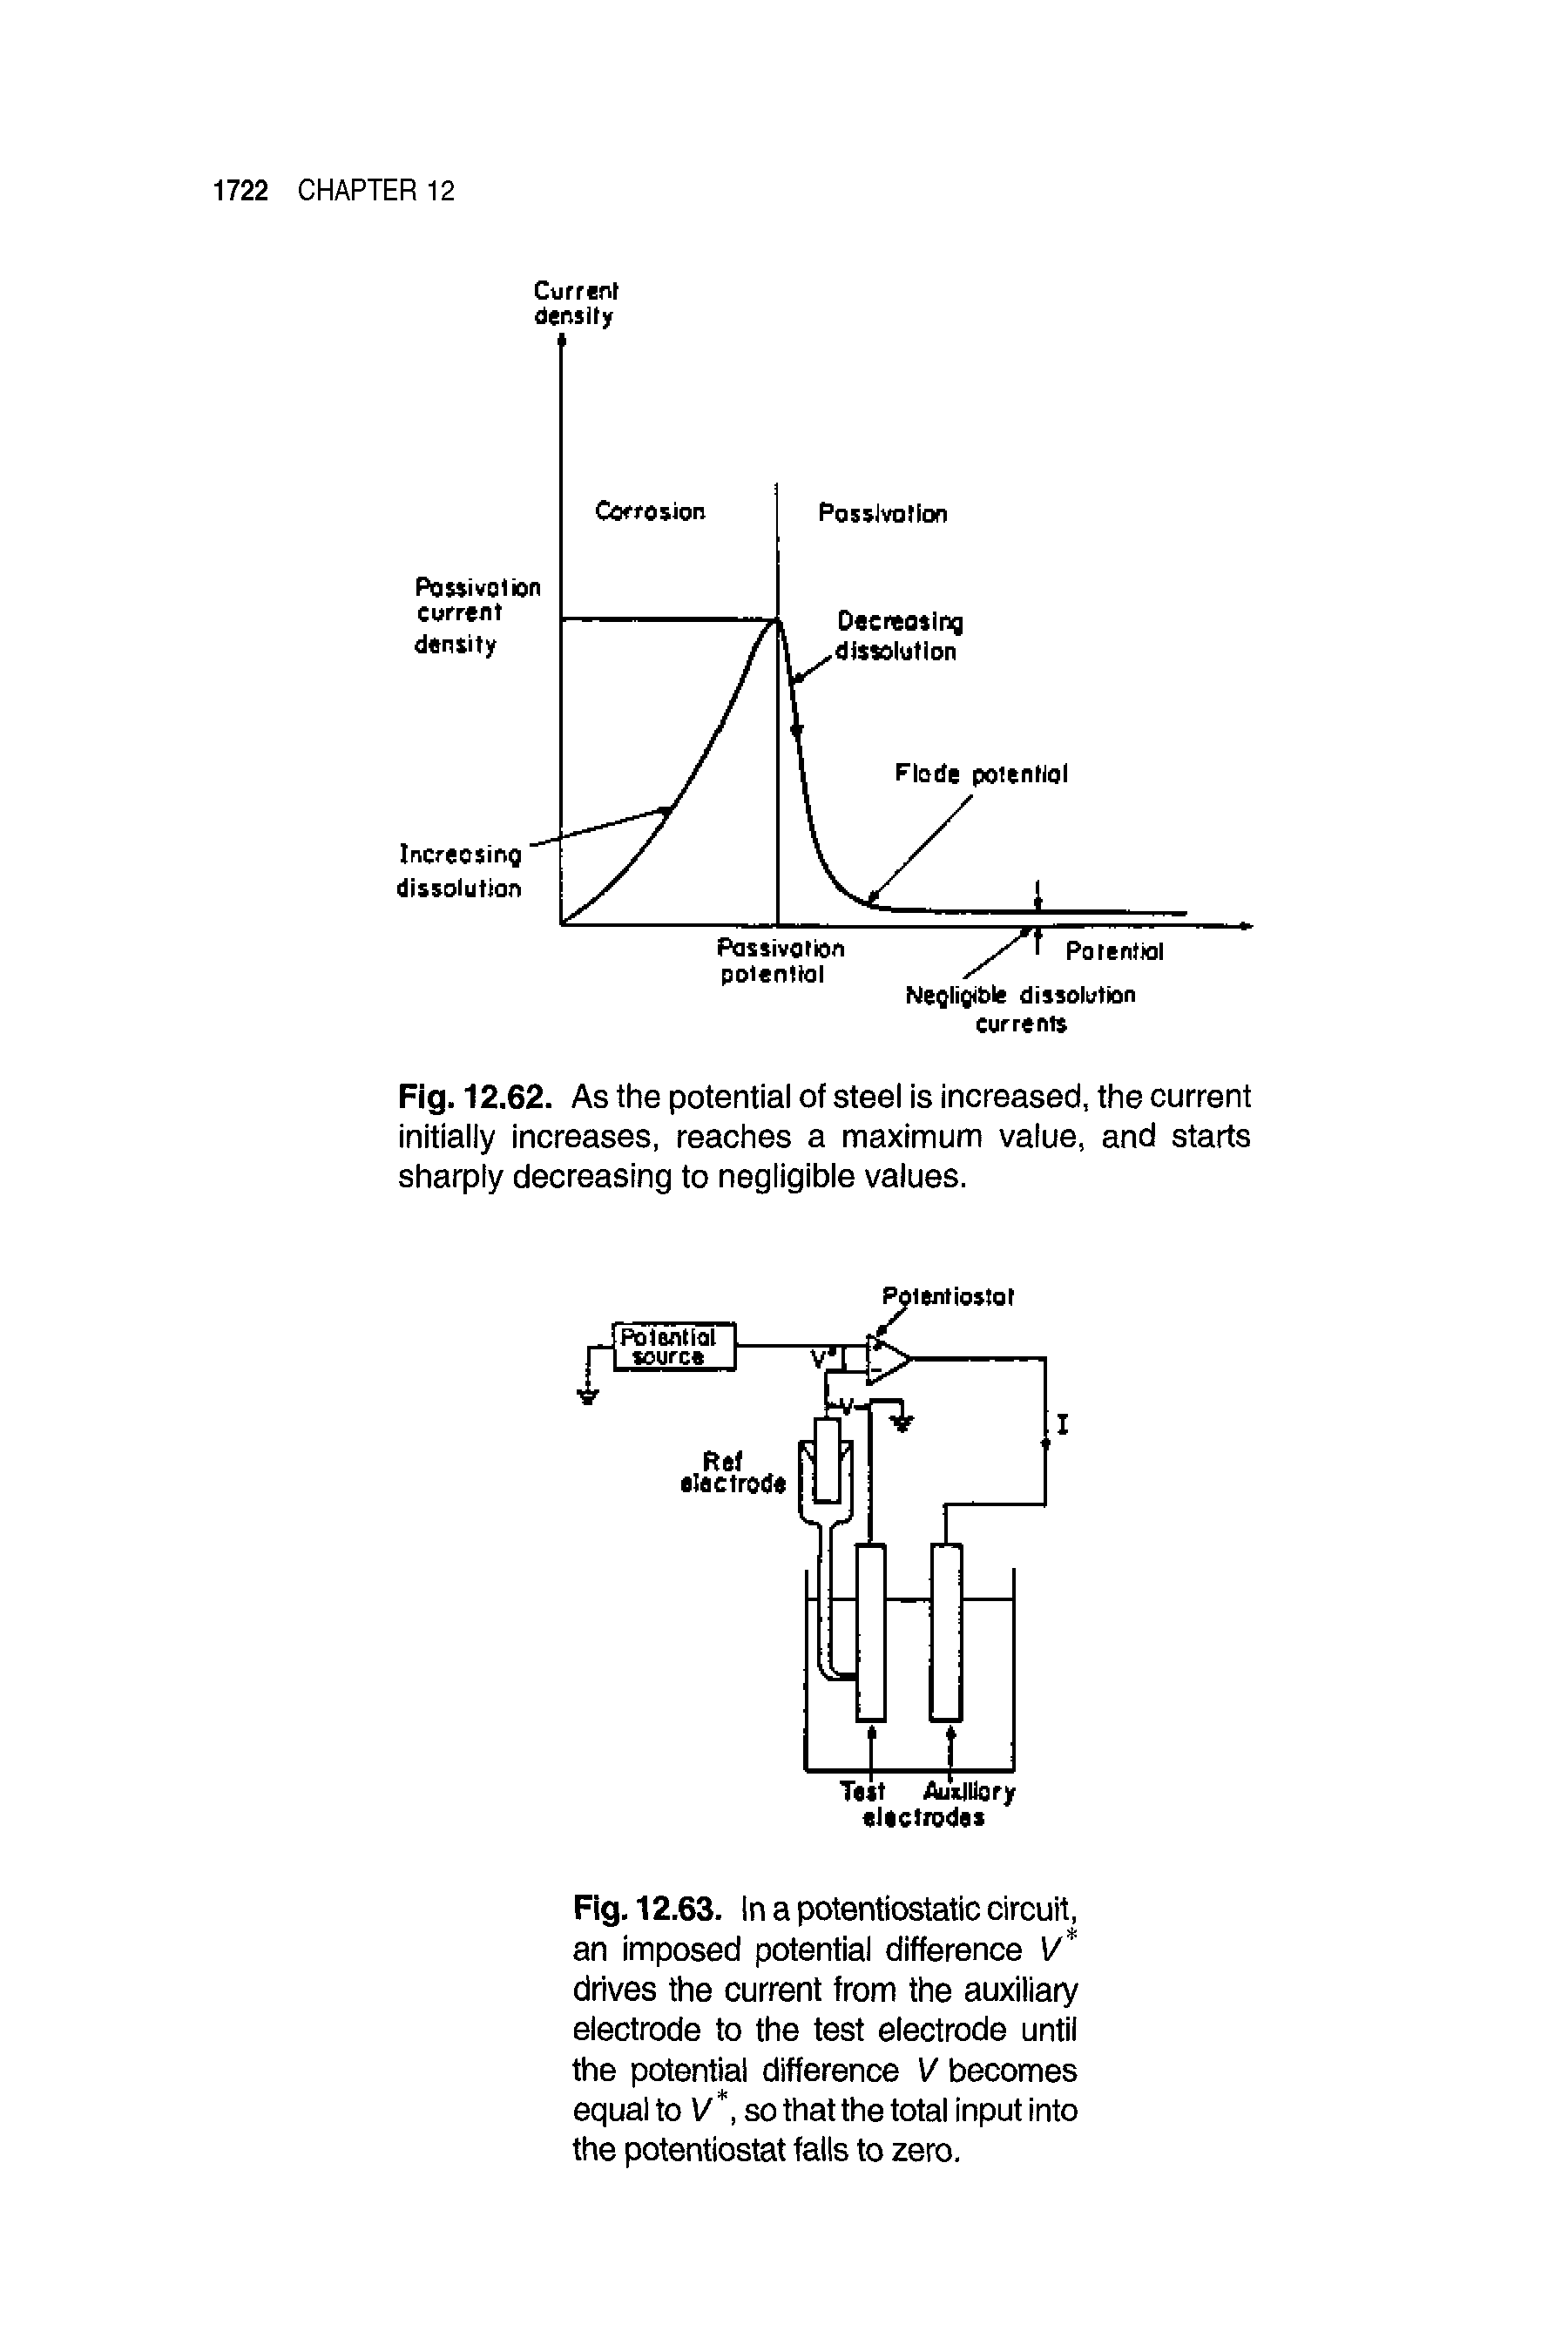 Fig. 12.63. In a potentiostatic circuit, an imposed potential difference V drives the current from the auxiliary electrode to the test electrode until the potential difference V becomes equal to V, so that the total input into the potentiostat falls to zero.